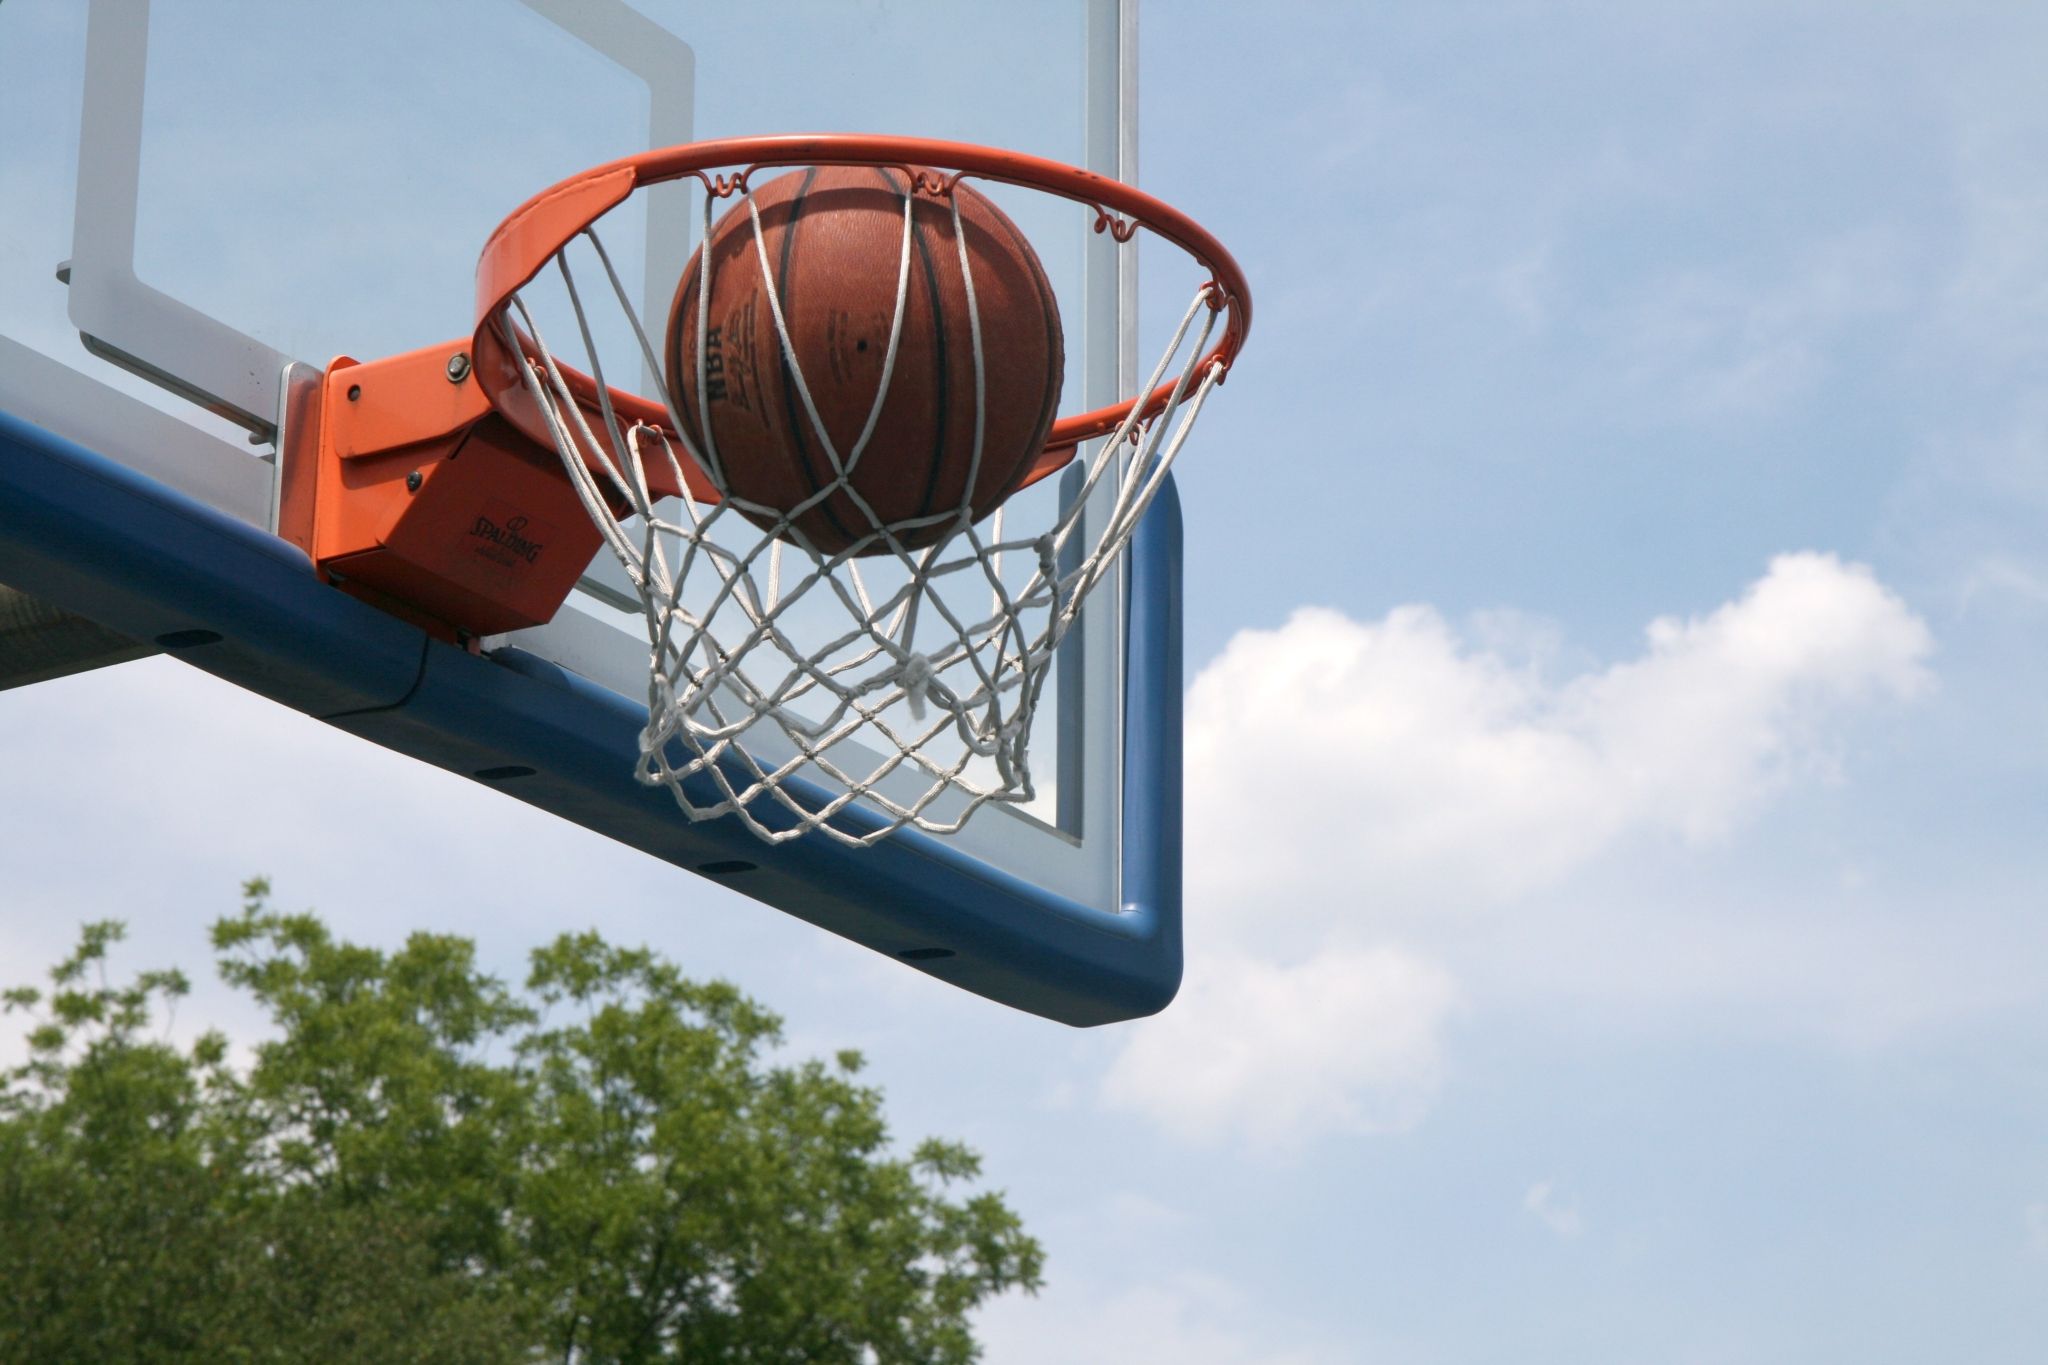 A basketball hoop with the ball in it - Basketball